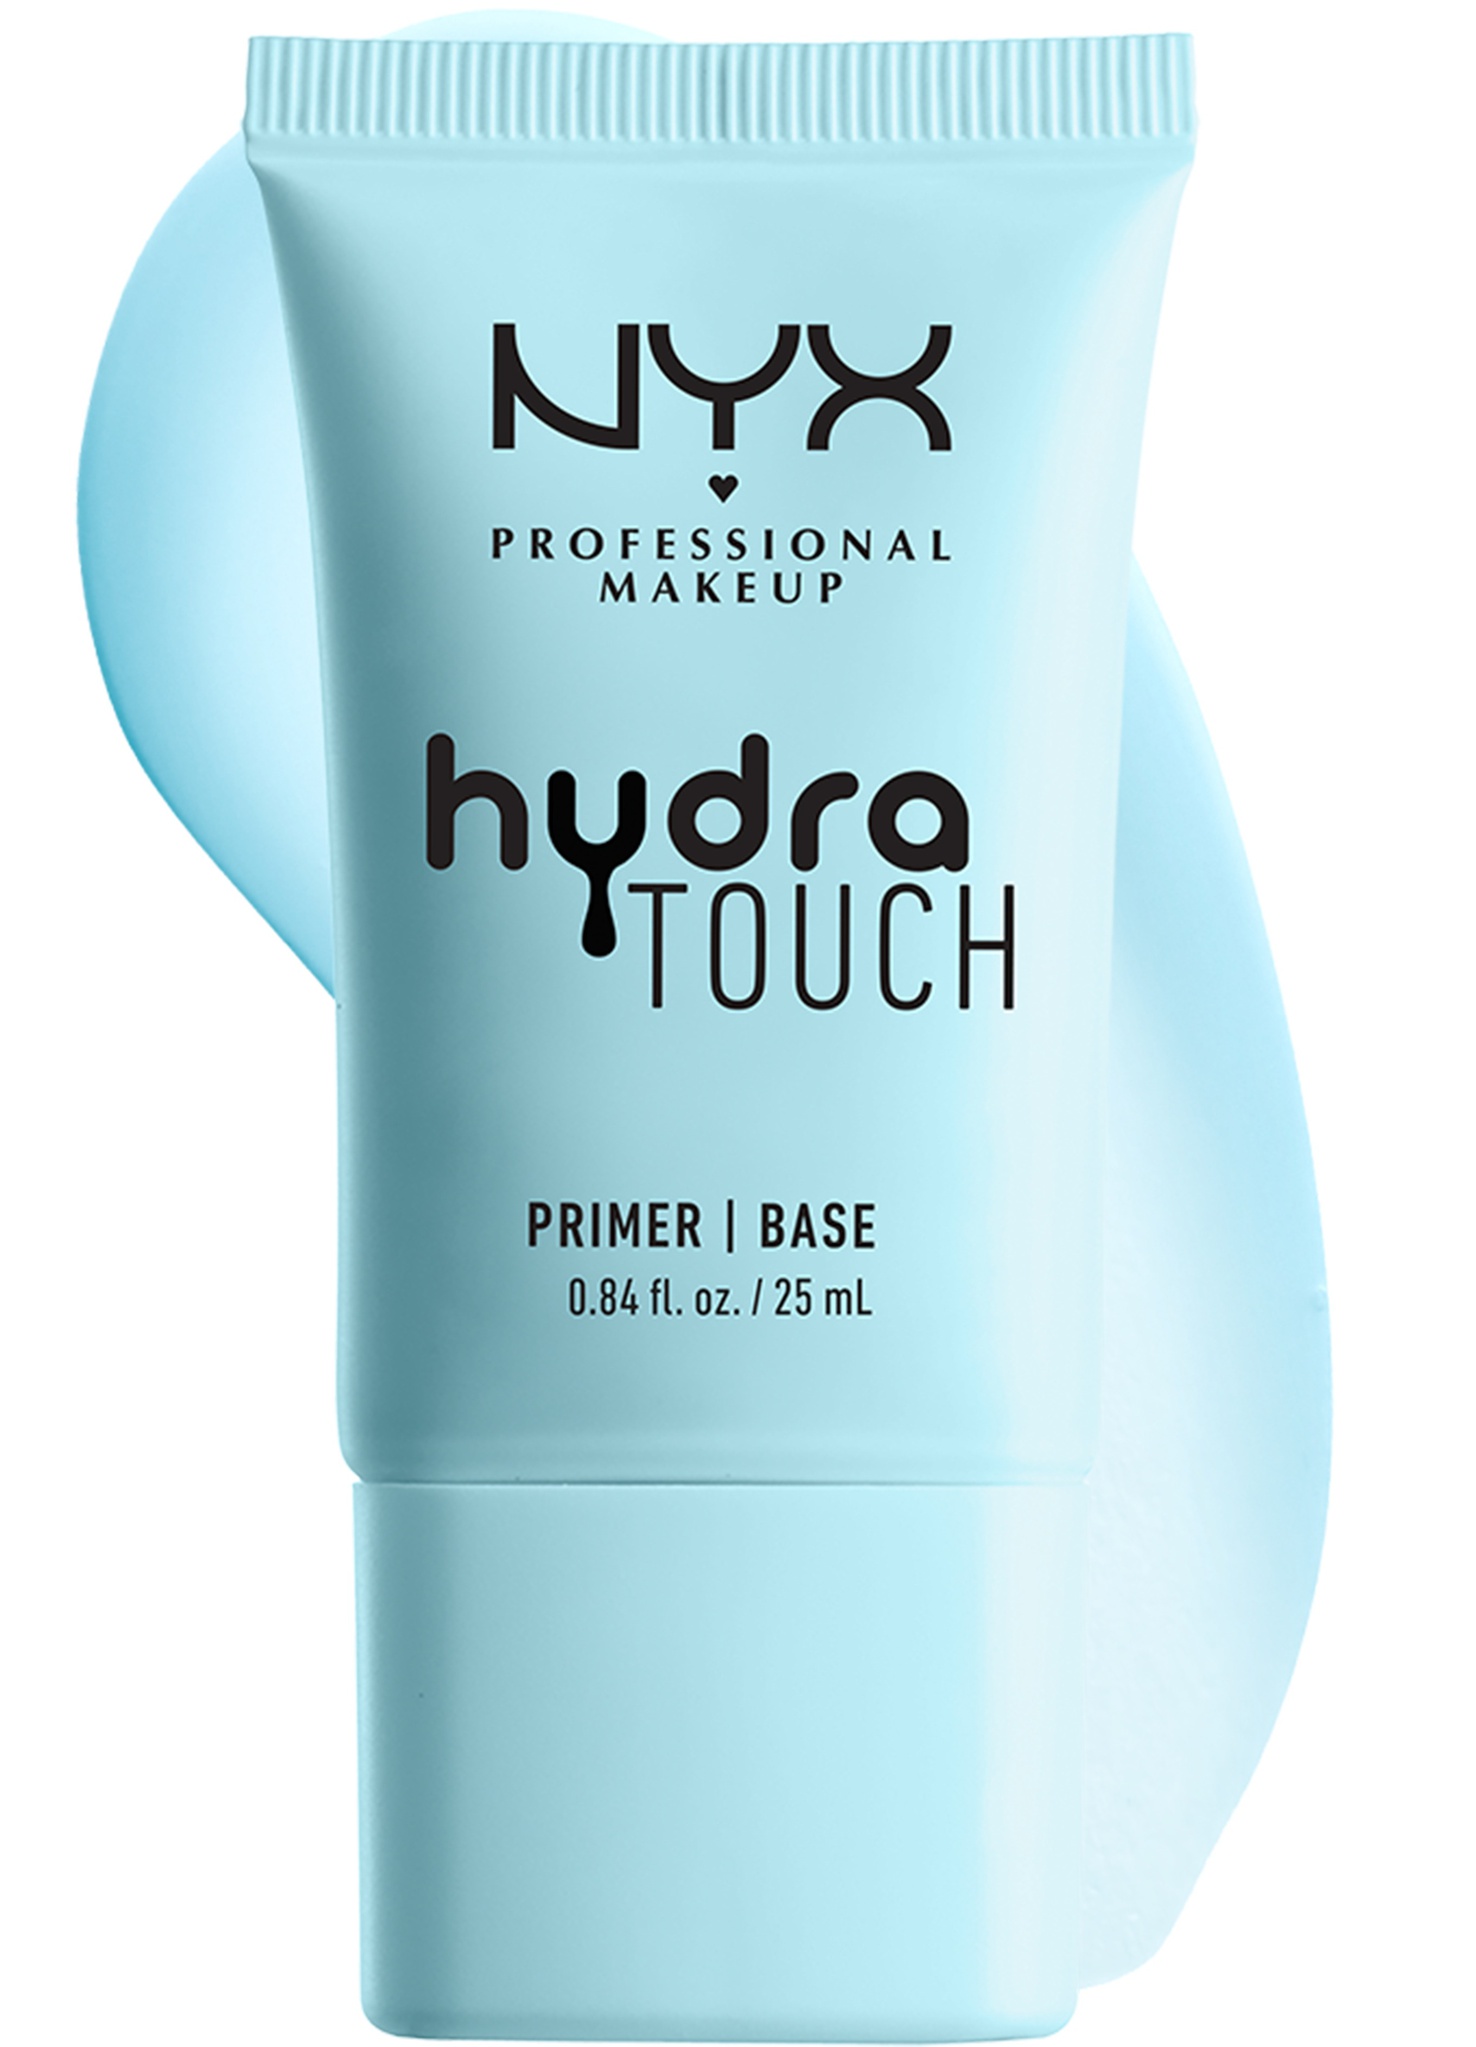 NYX Professional Makeup Hydra Touch Primer Moisturizing Face Primer